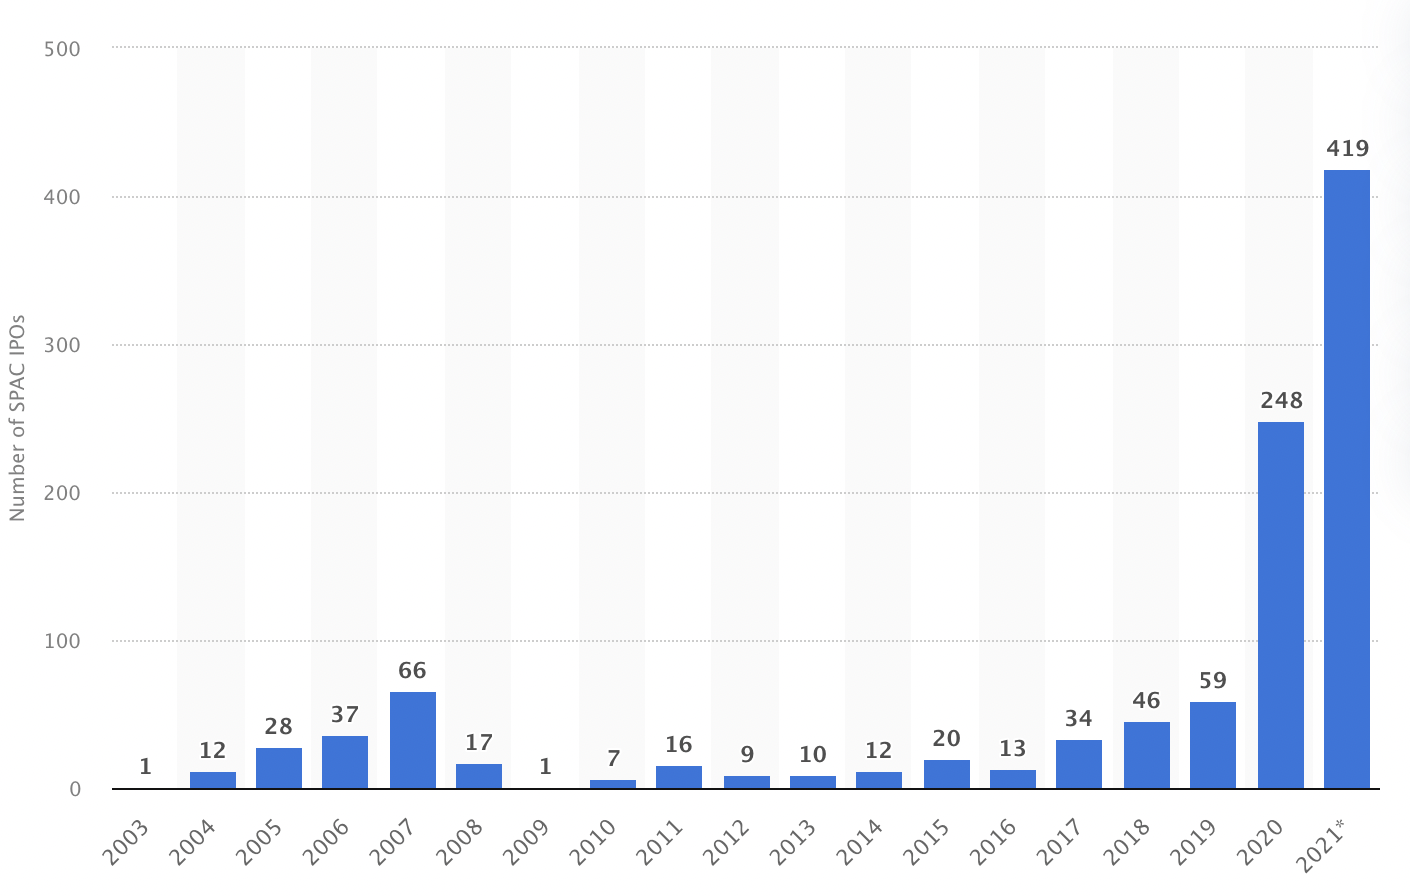 Number of SPAC IPOs from 2003-2021